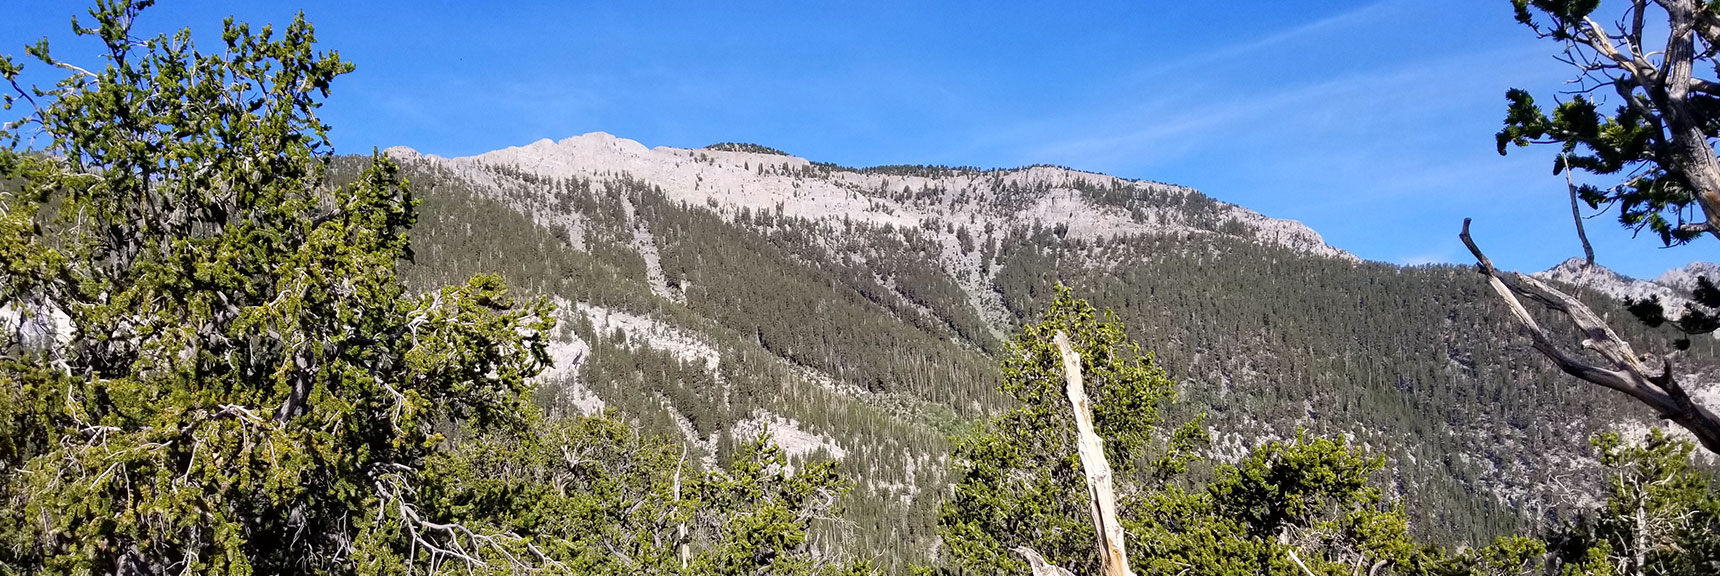 Eastern Side of Mummy Mountain Viewed from the First Plateau on the North Loop Trail in Mt. Charleston Wilderness, Nevada